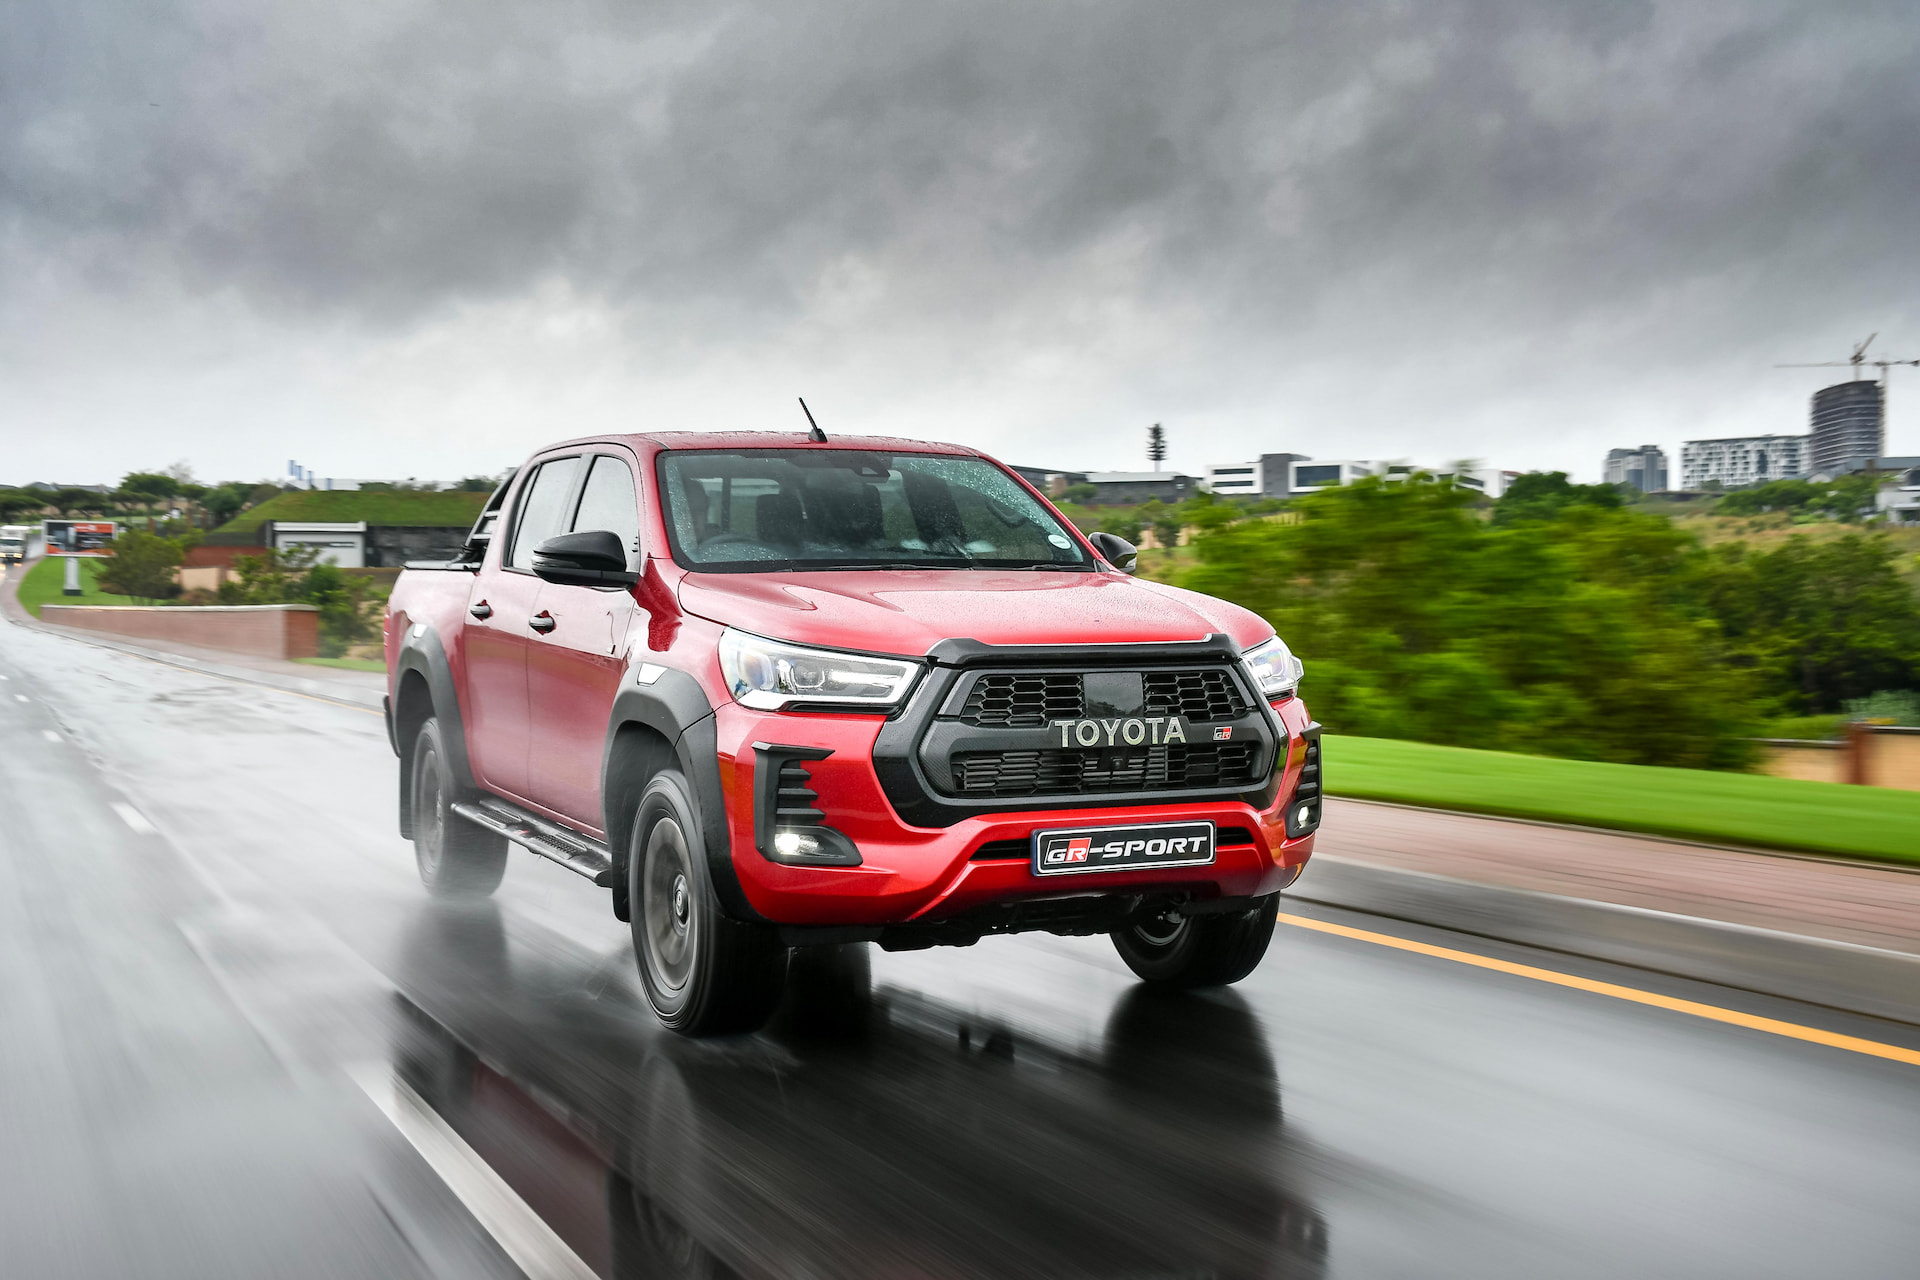 Toyota South Africa has unveiled the Toyota Hilux GR Sport